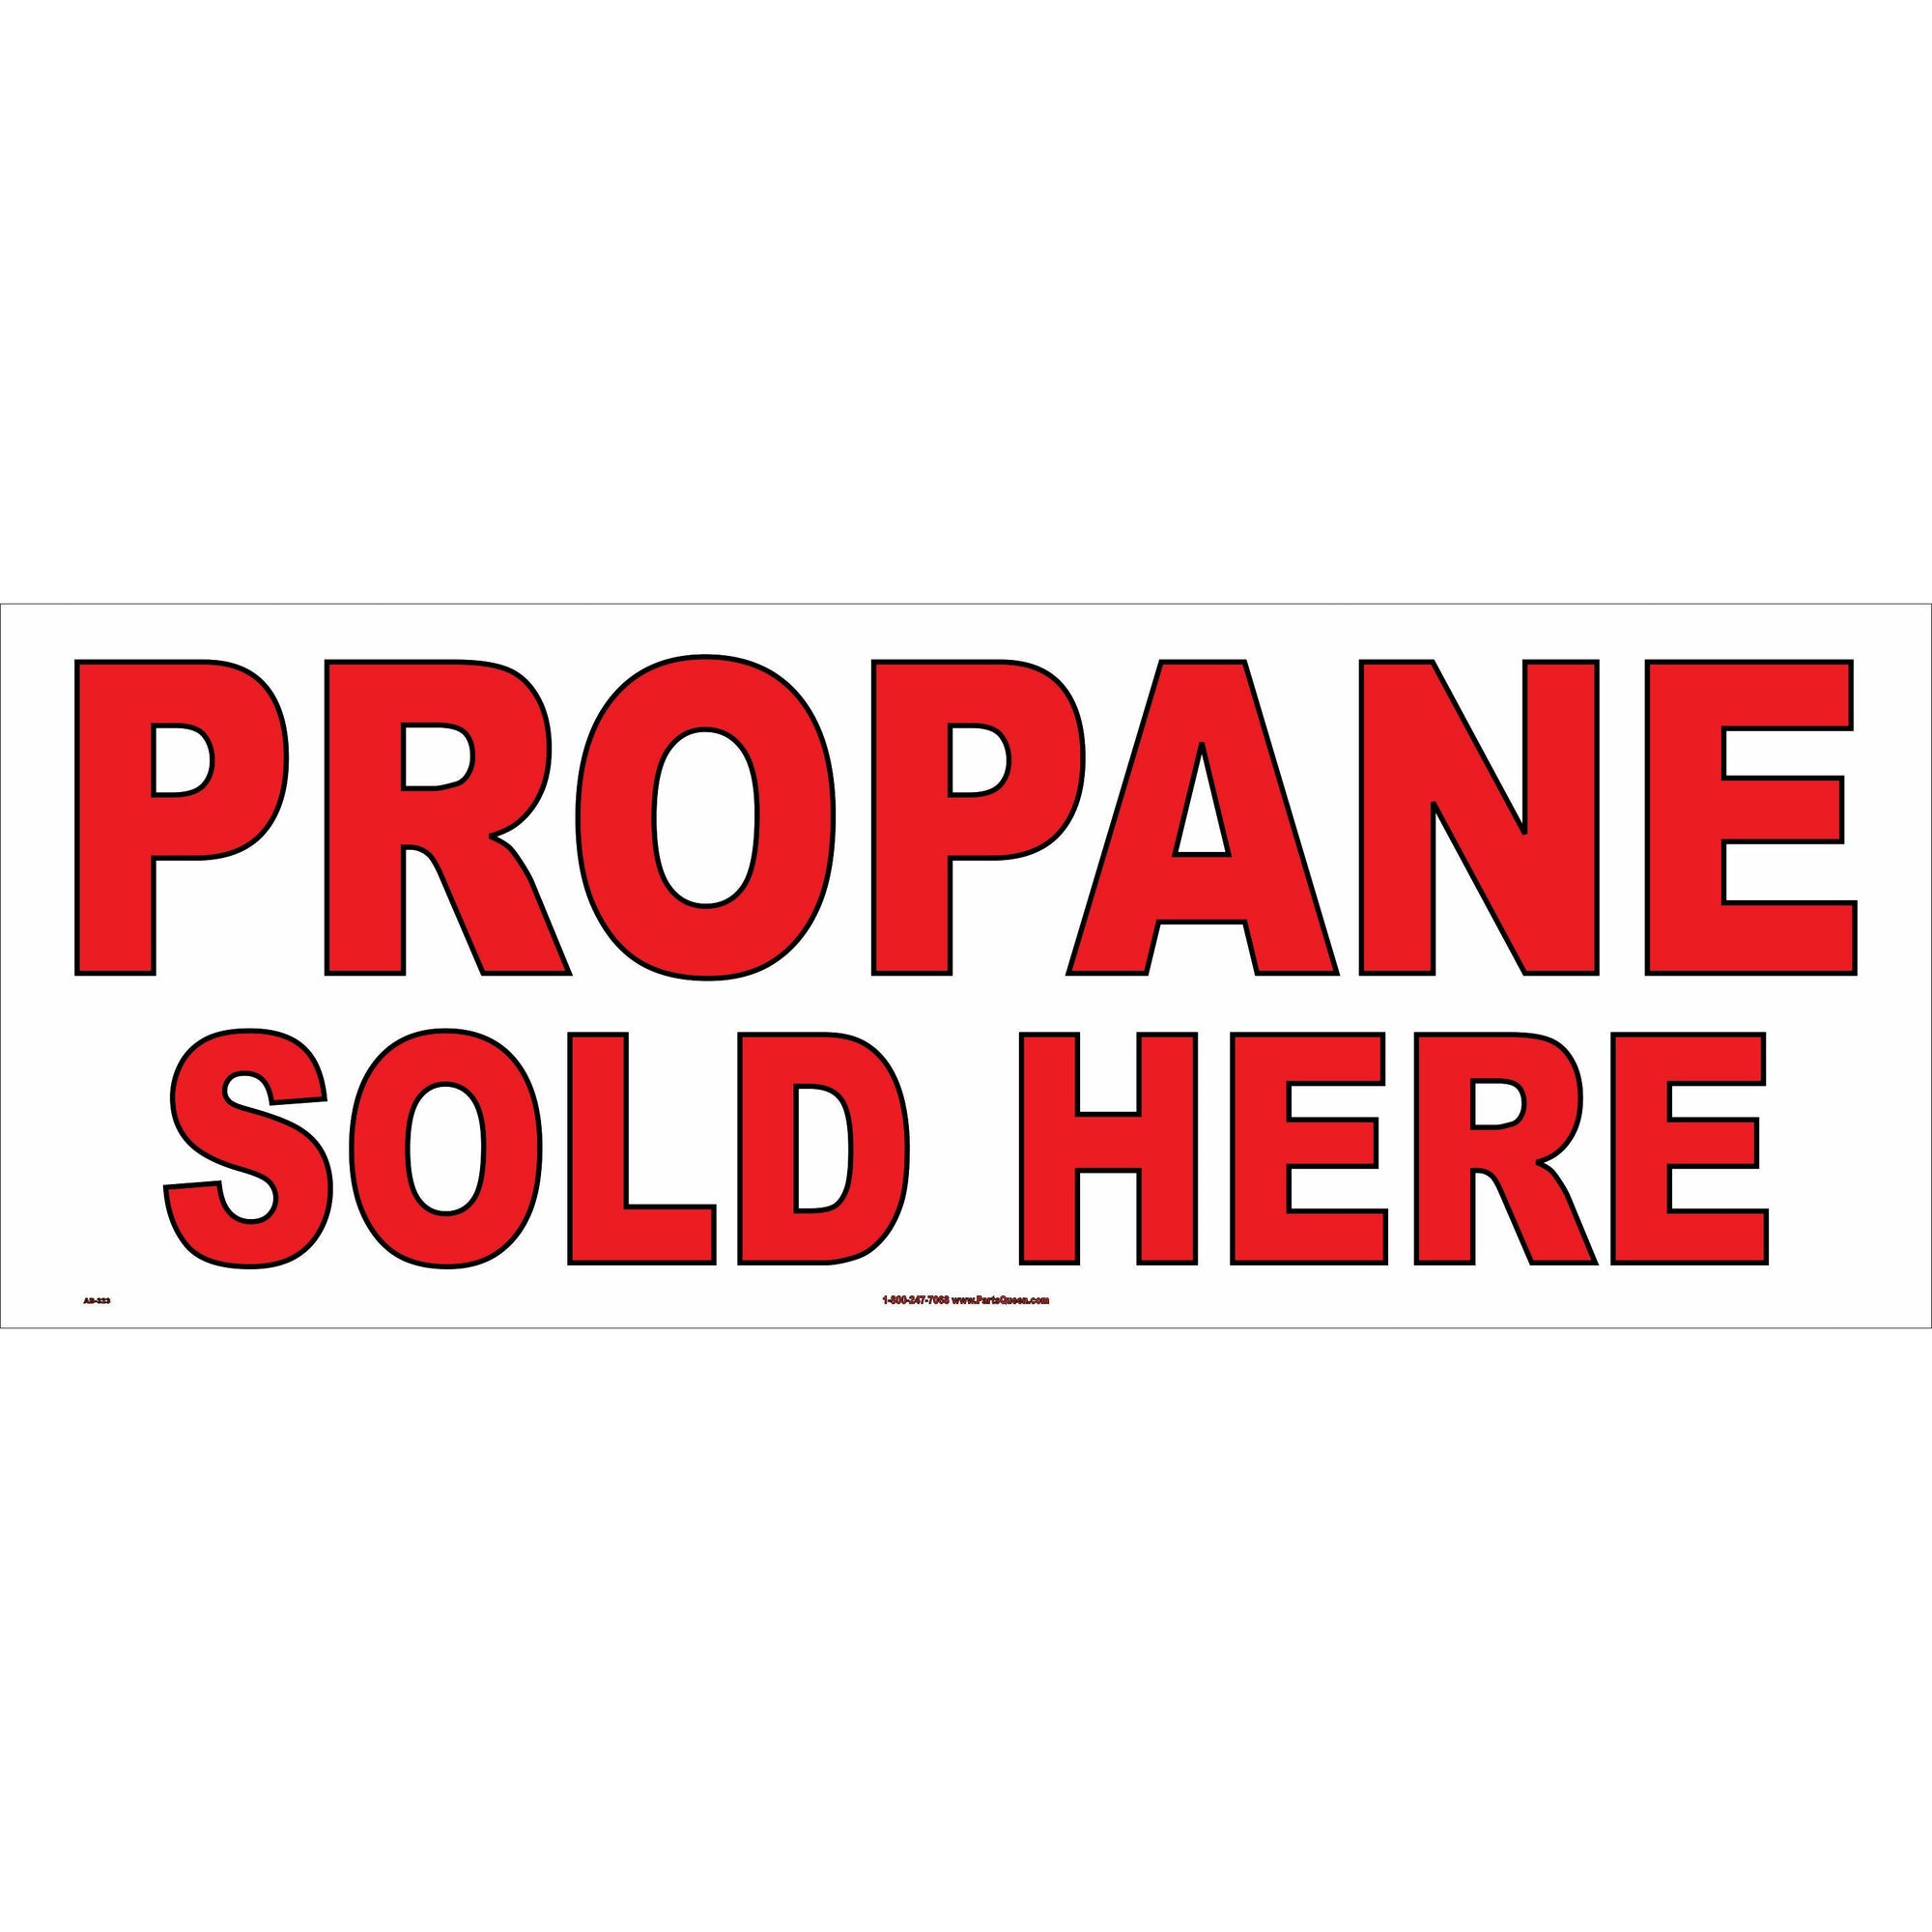 AB-323 "PROPANE SOLD HERE" BANNER !!!